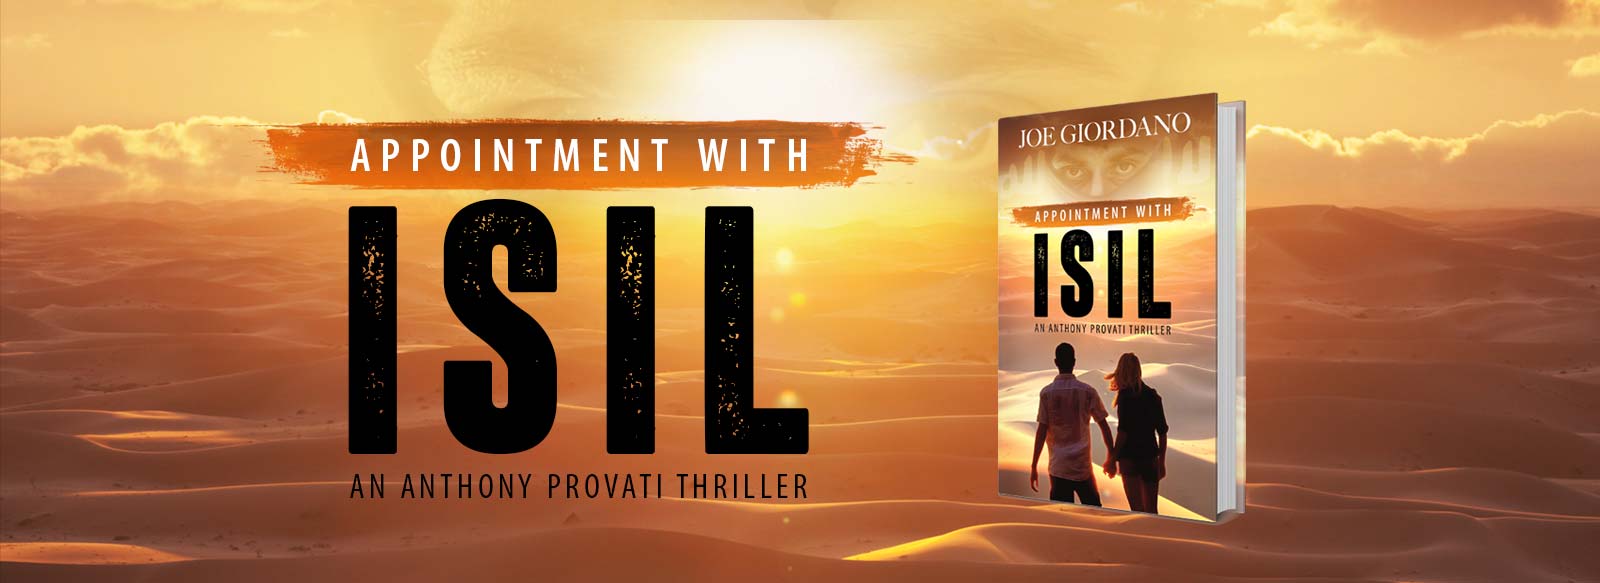 appointment with Isil book